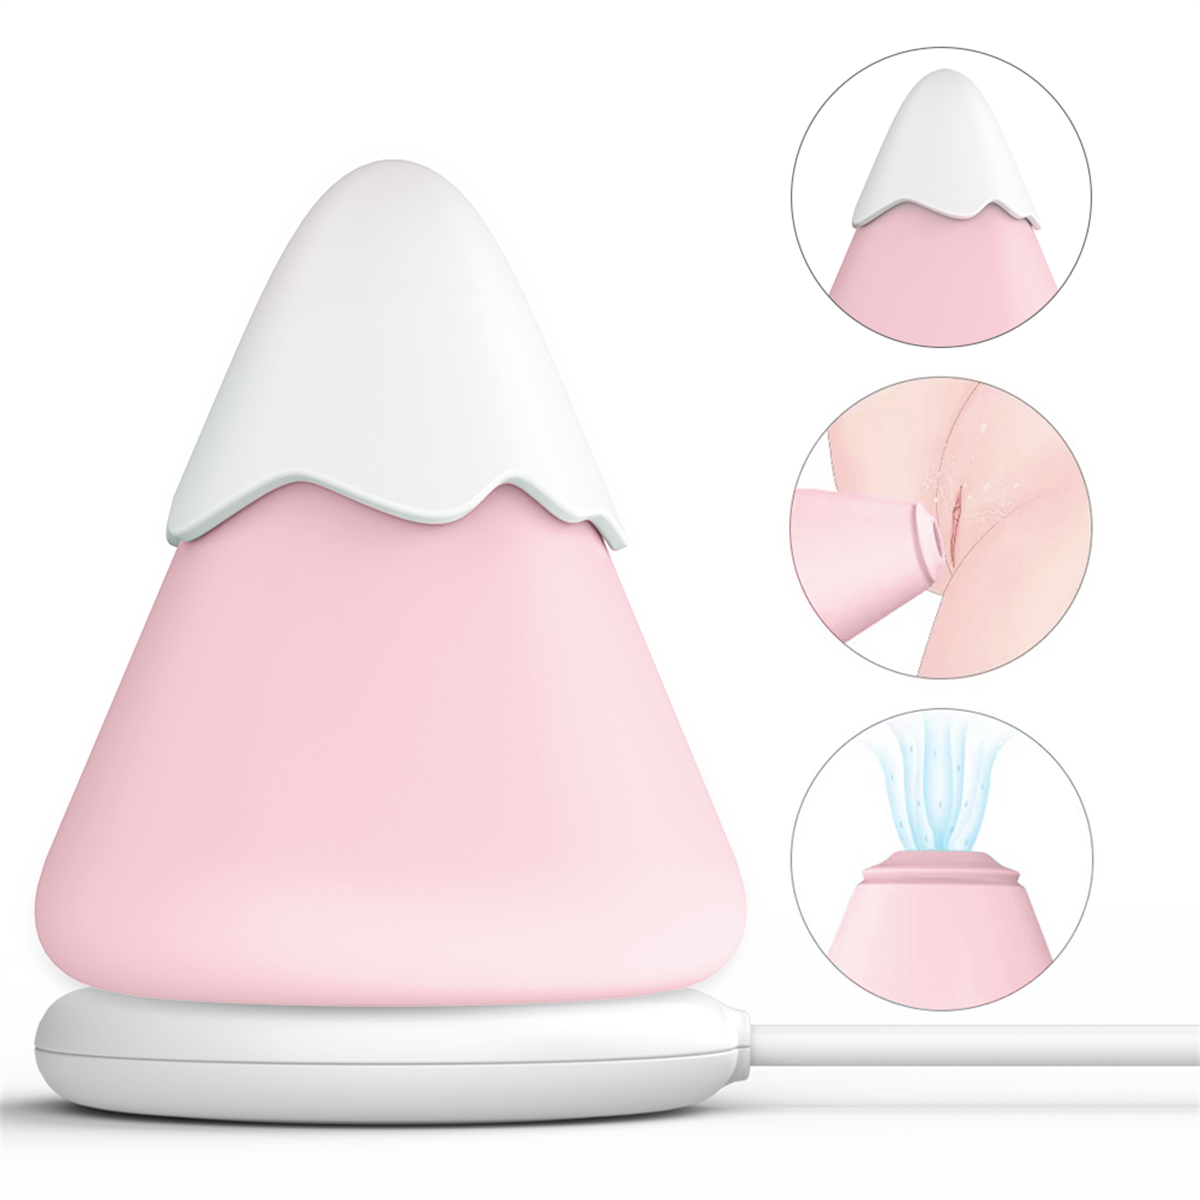 X006 Snow Mountain Shape  Sucking vibrators clitoris sucker breast clips sex toy adults products stimulate vibrators for women with 7 lighting adjustments